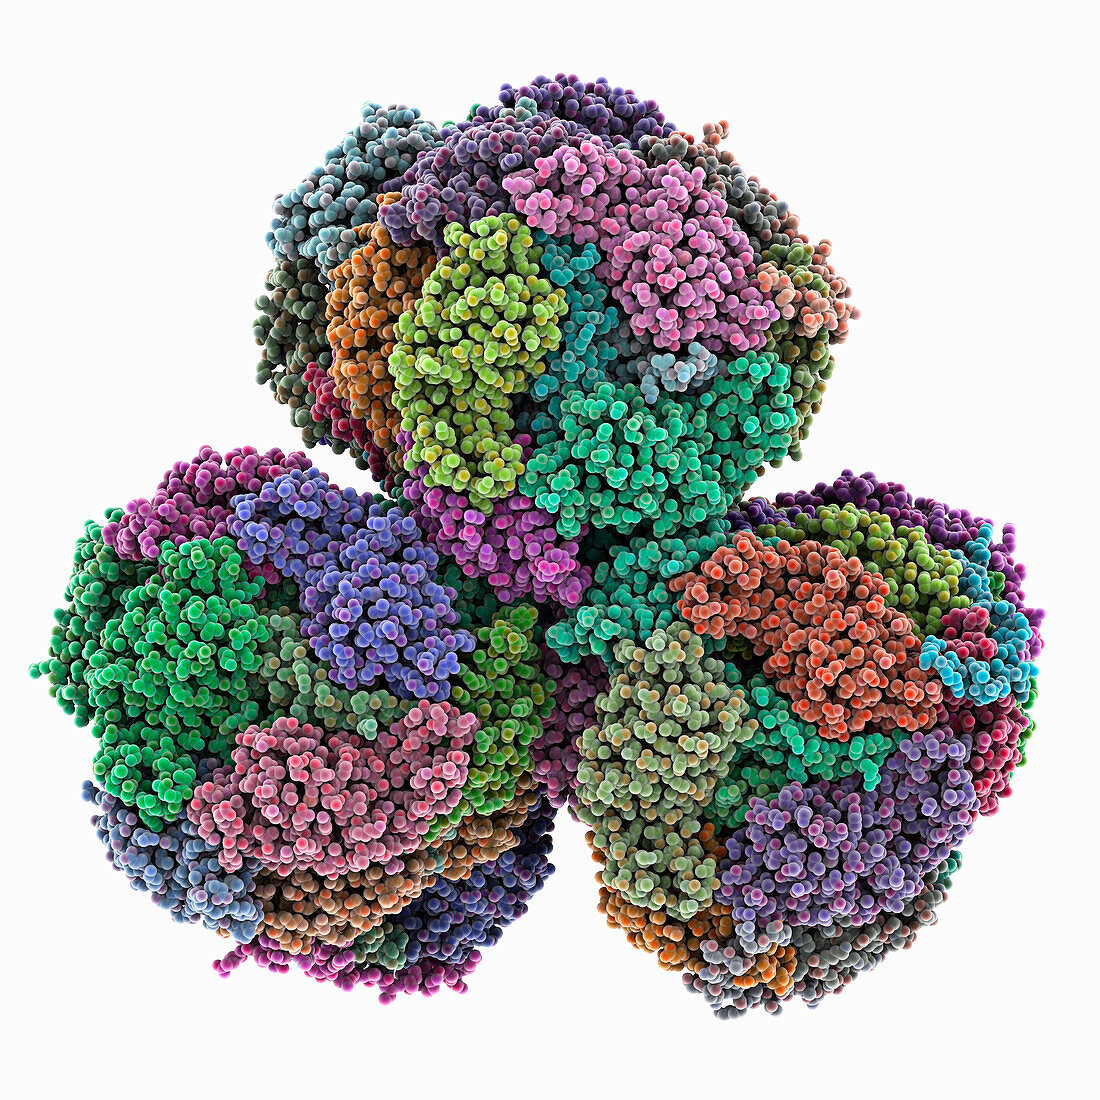 Phycobilisome from Synechocystis PCC 6803, molecular model